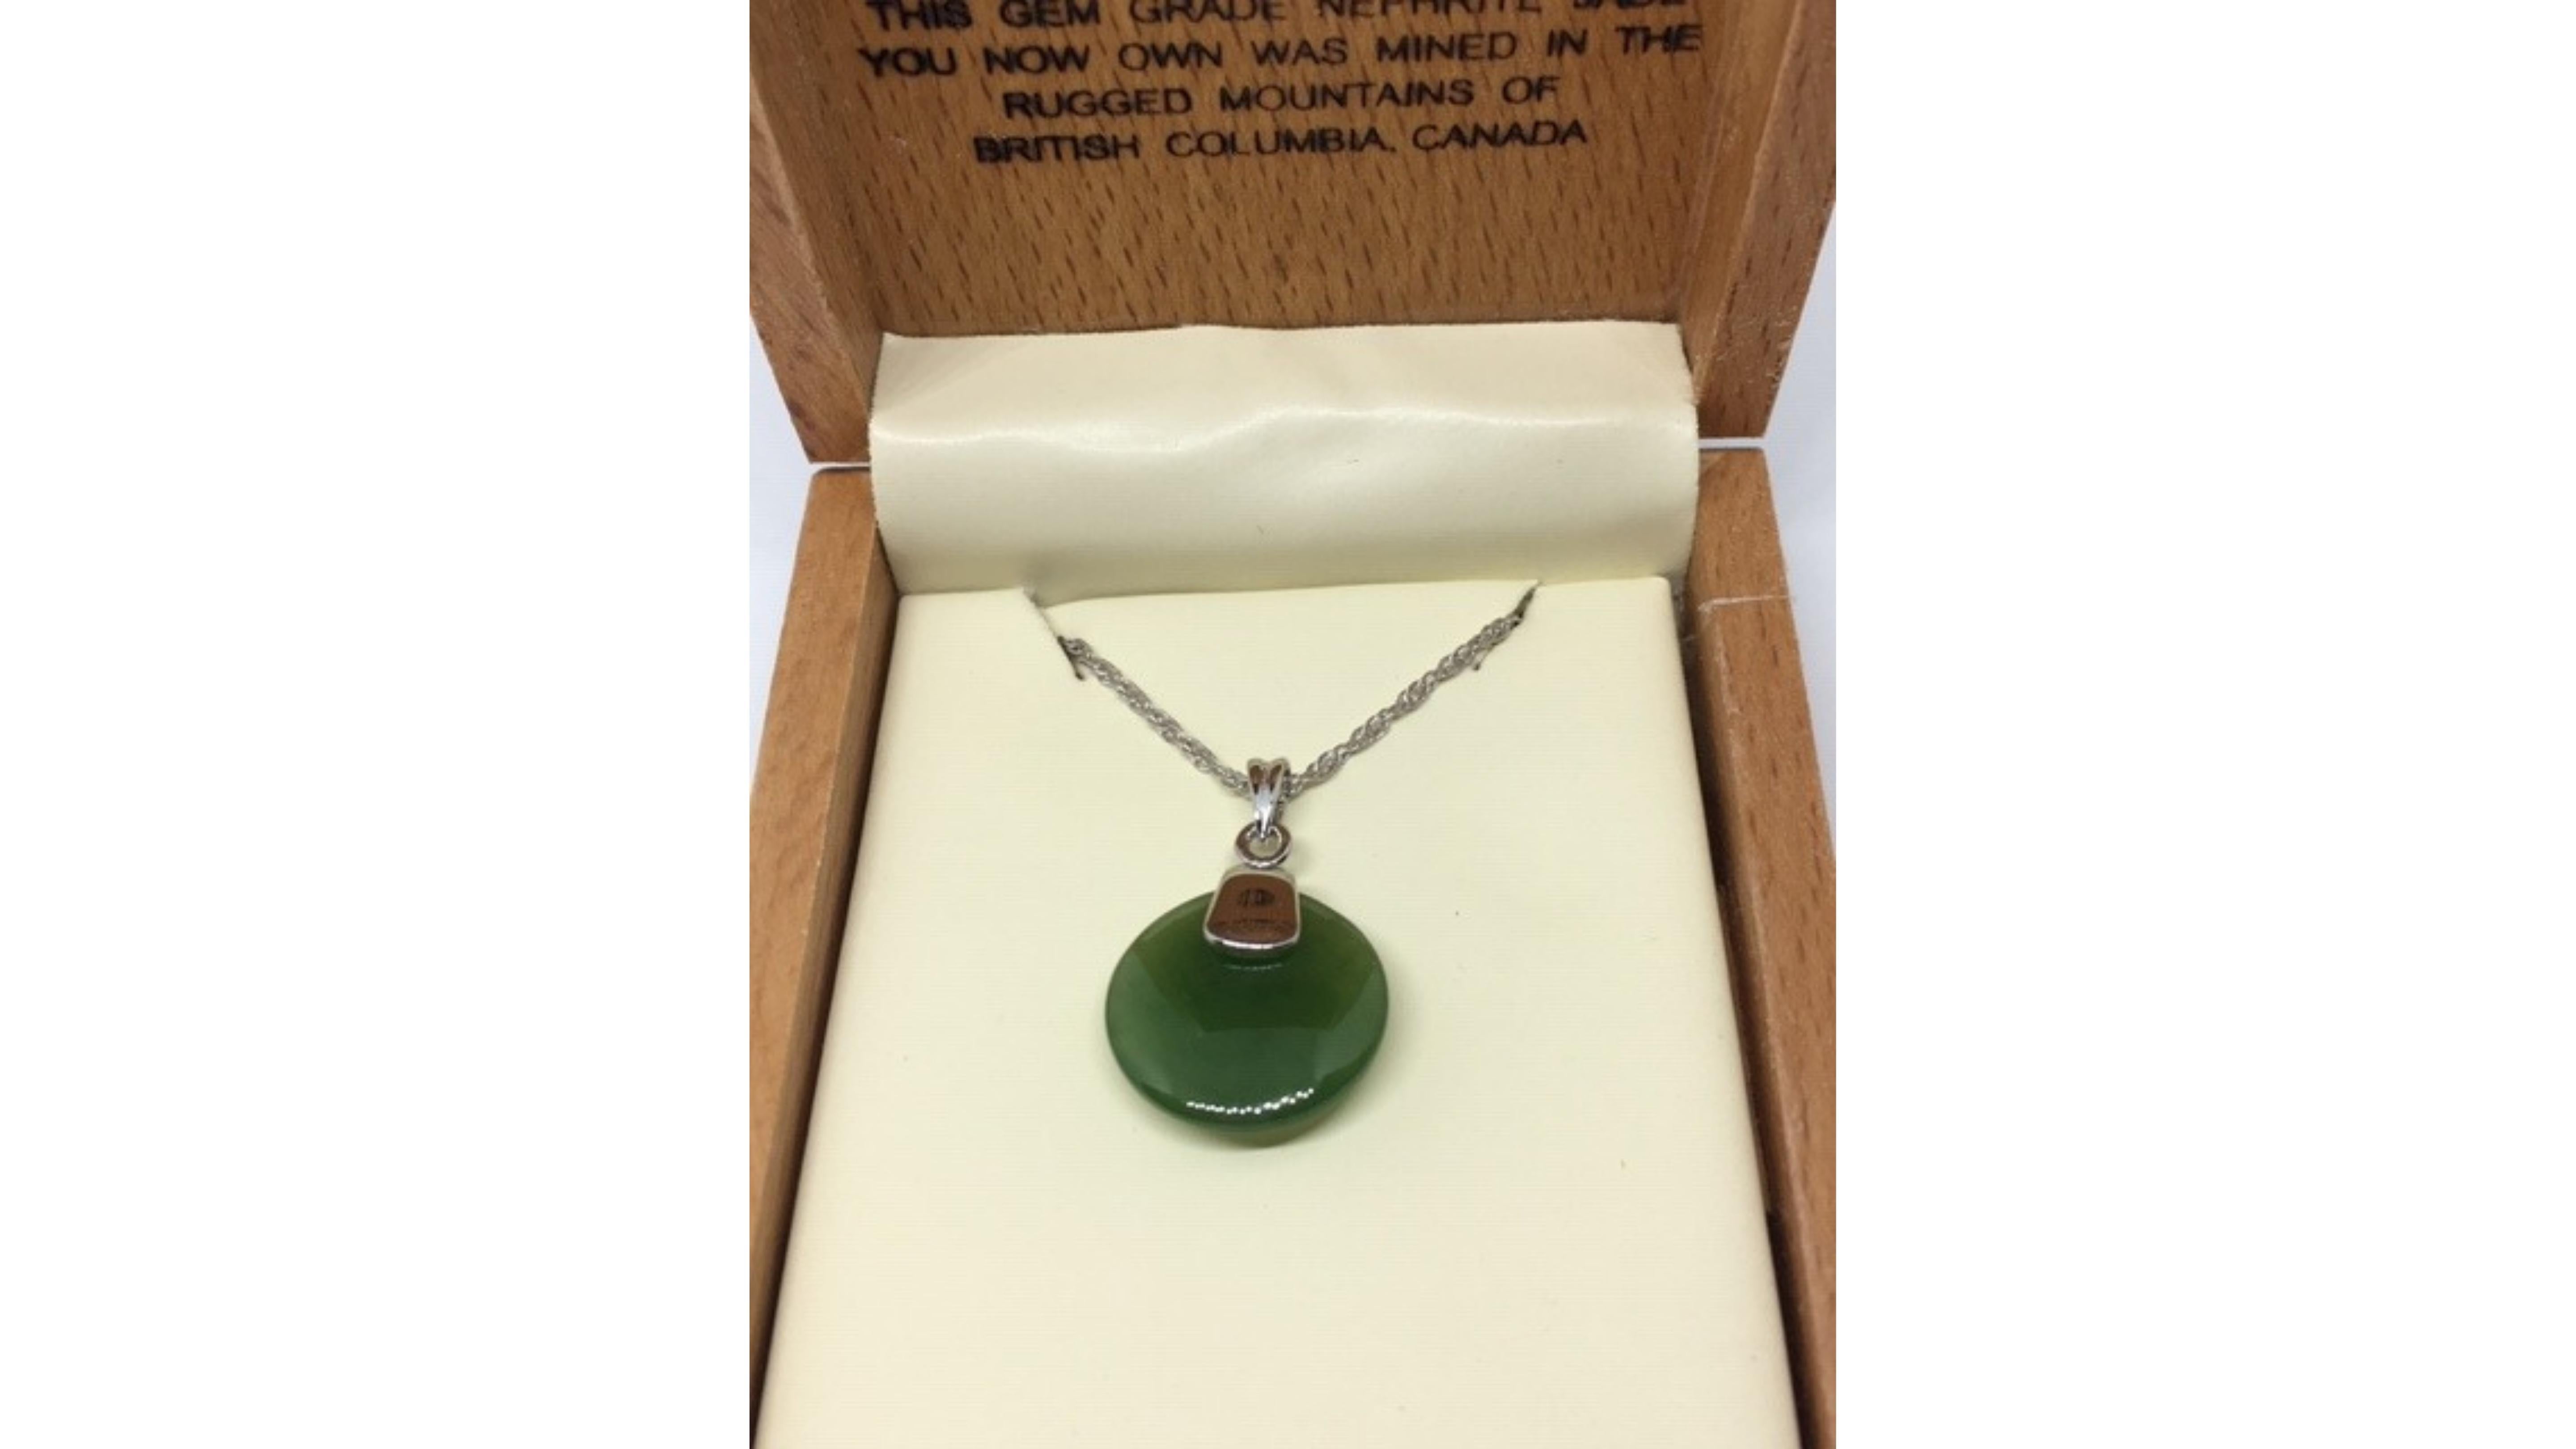 Canadian Nephrite Jade set into Sterling Silver


 Nephrite is extremely tough and resistant due to dense, fine-fibered matted aggregates and is suitable for the production of tools and weapons. And also they have meanings as they did traditionally